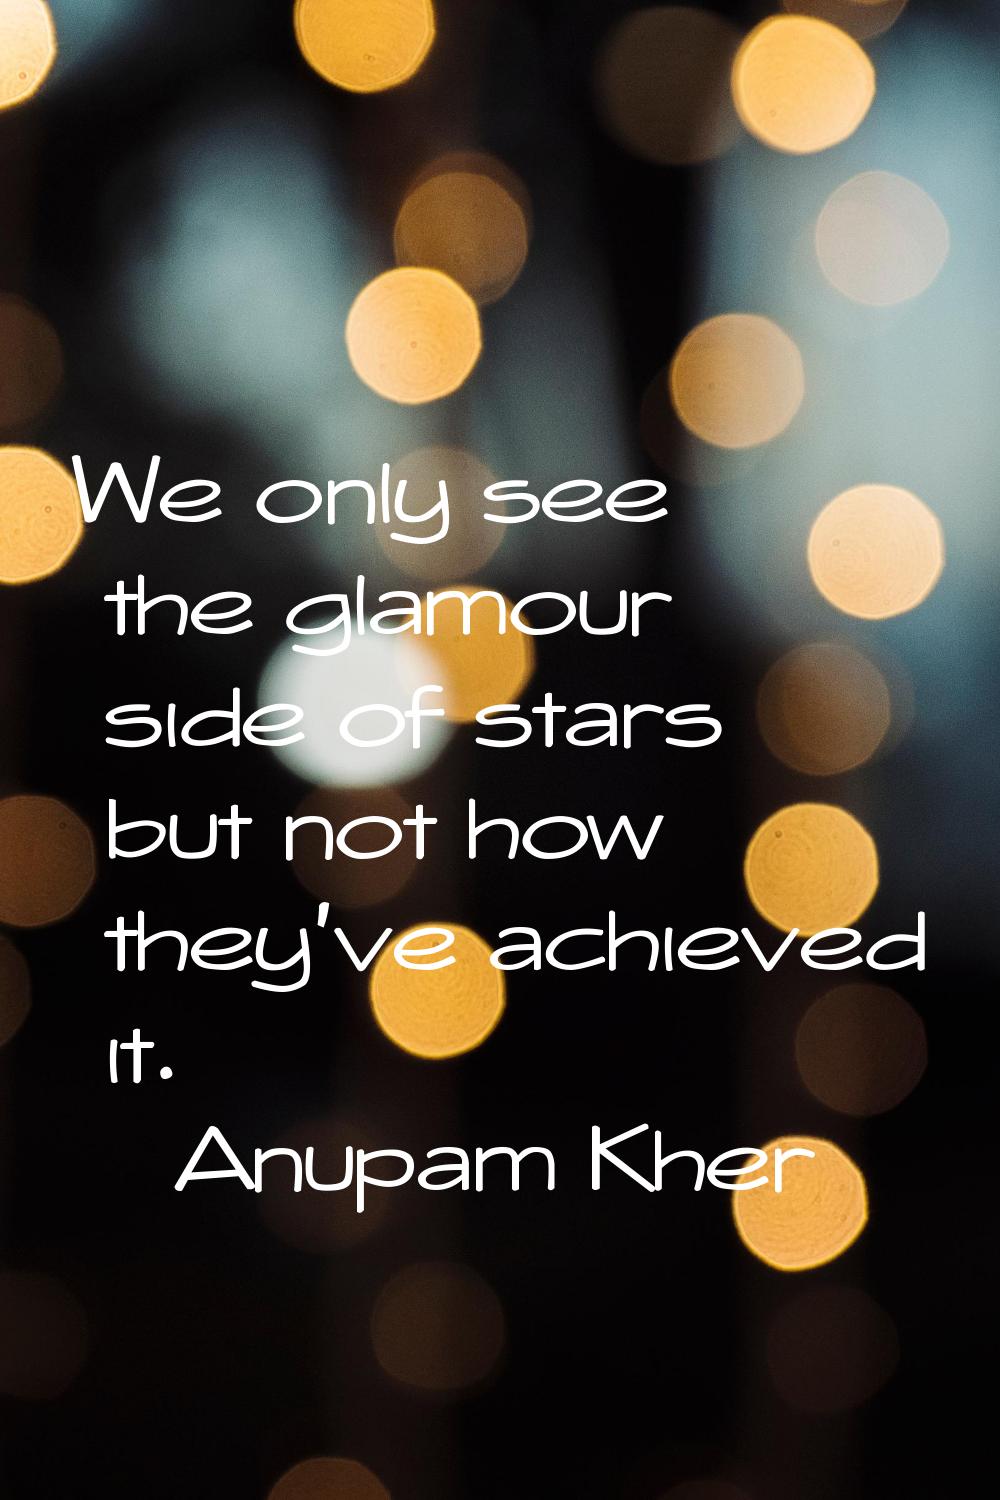 We only see the glamour side of stars but not how they've achieved it.